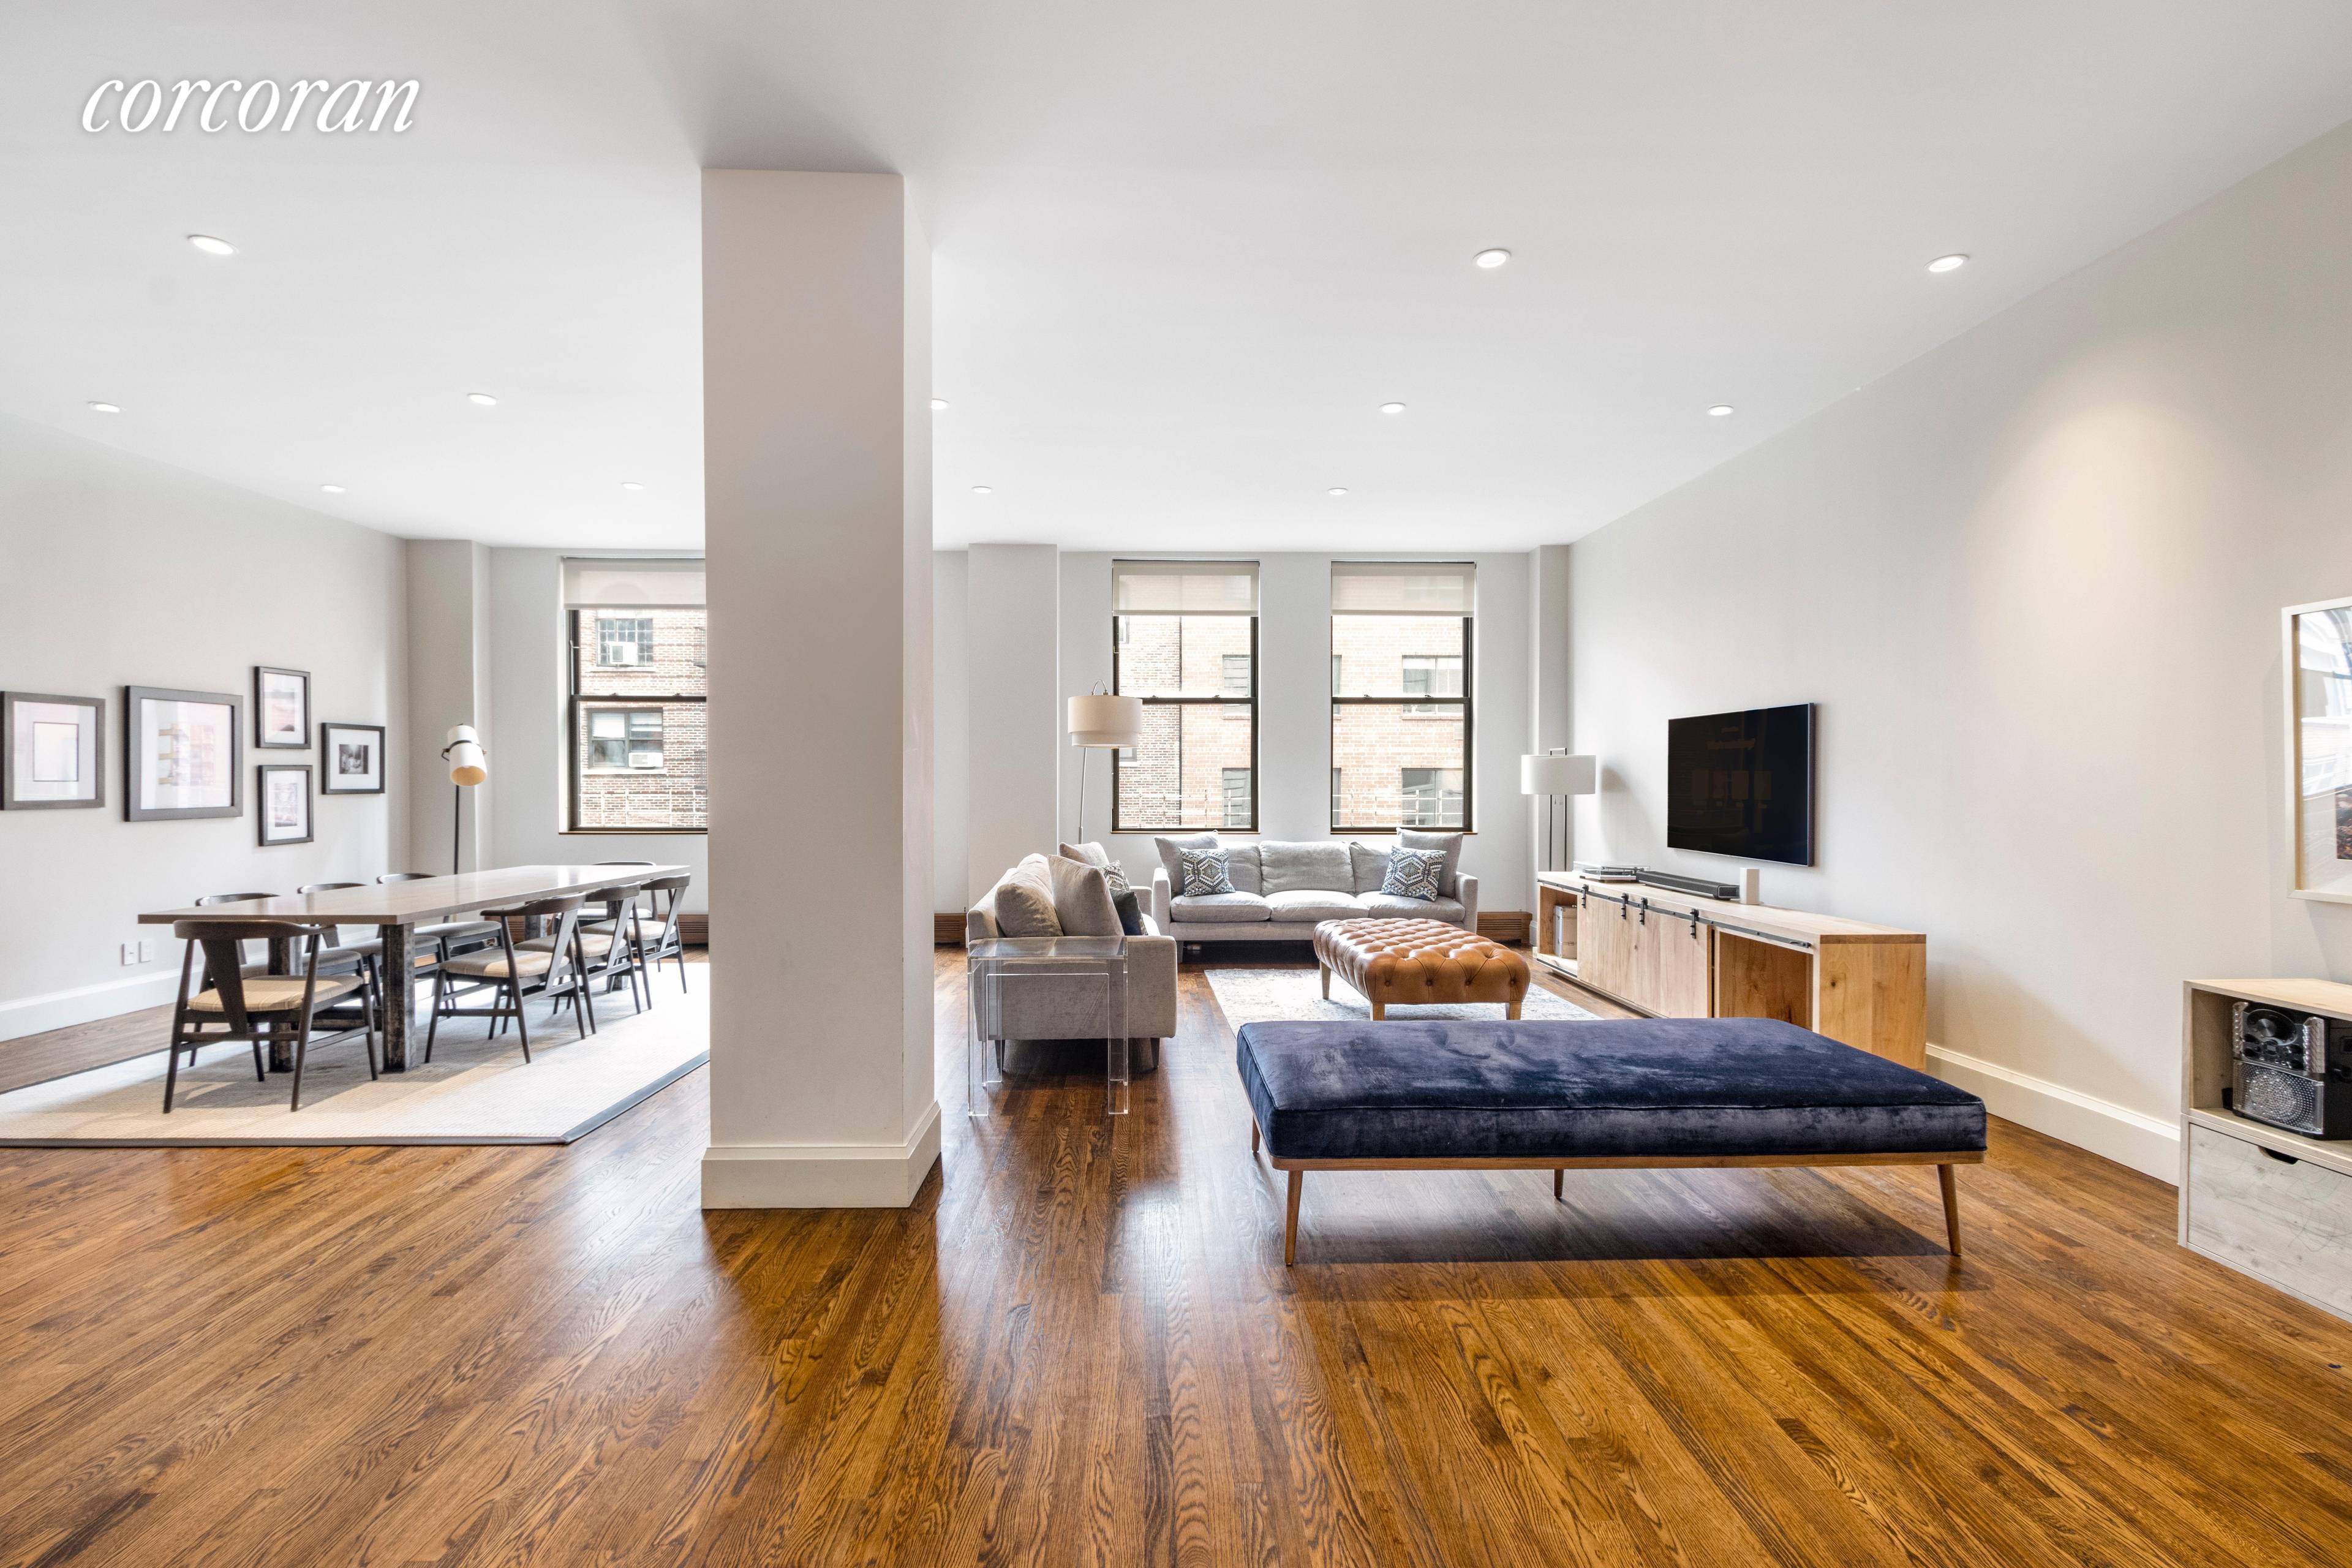 4C at 257 W 17th Street is a beautifully renovated and spacious three bedroom and two and a half bathroom loft.